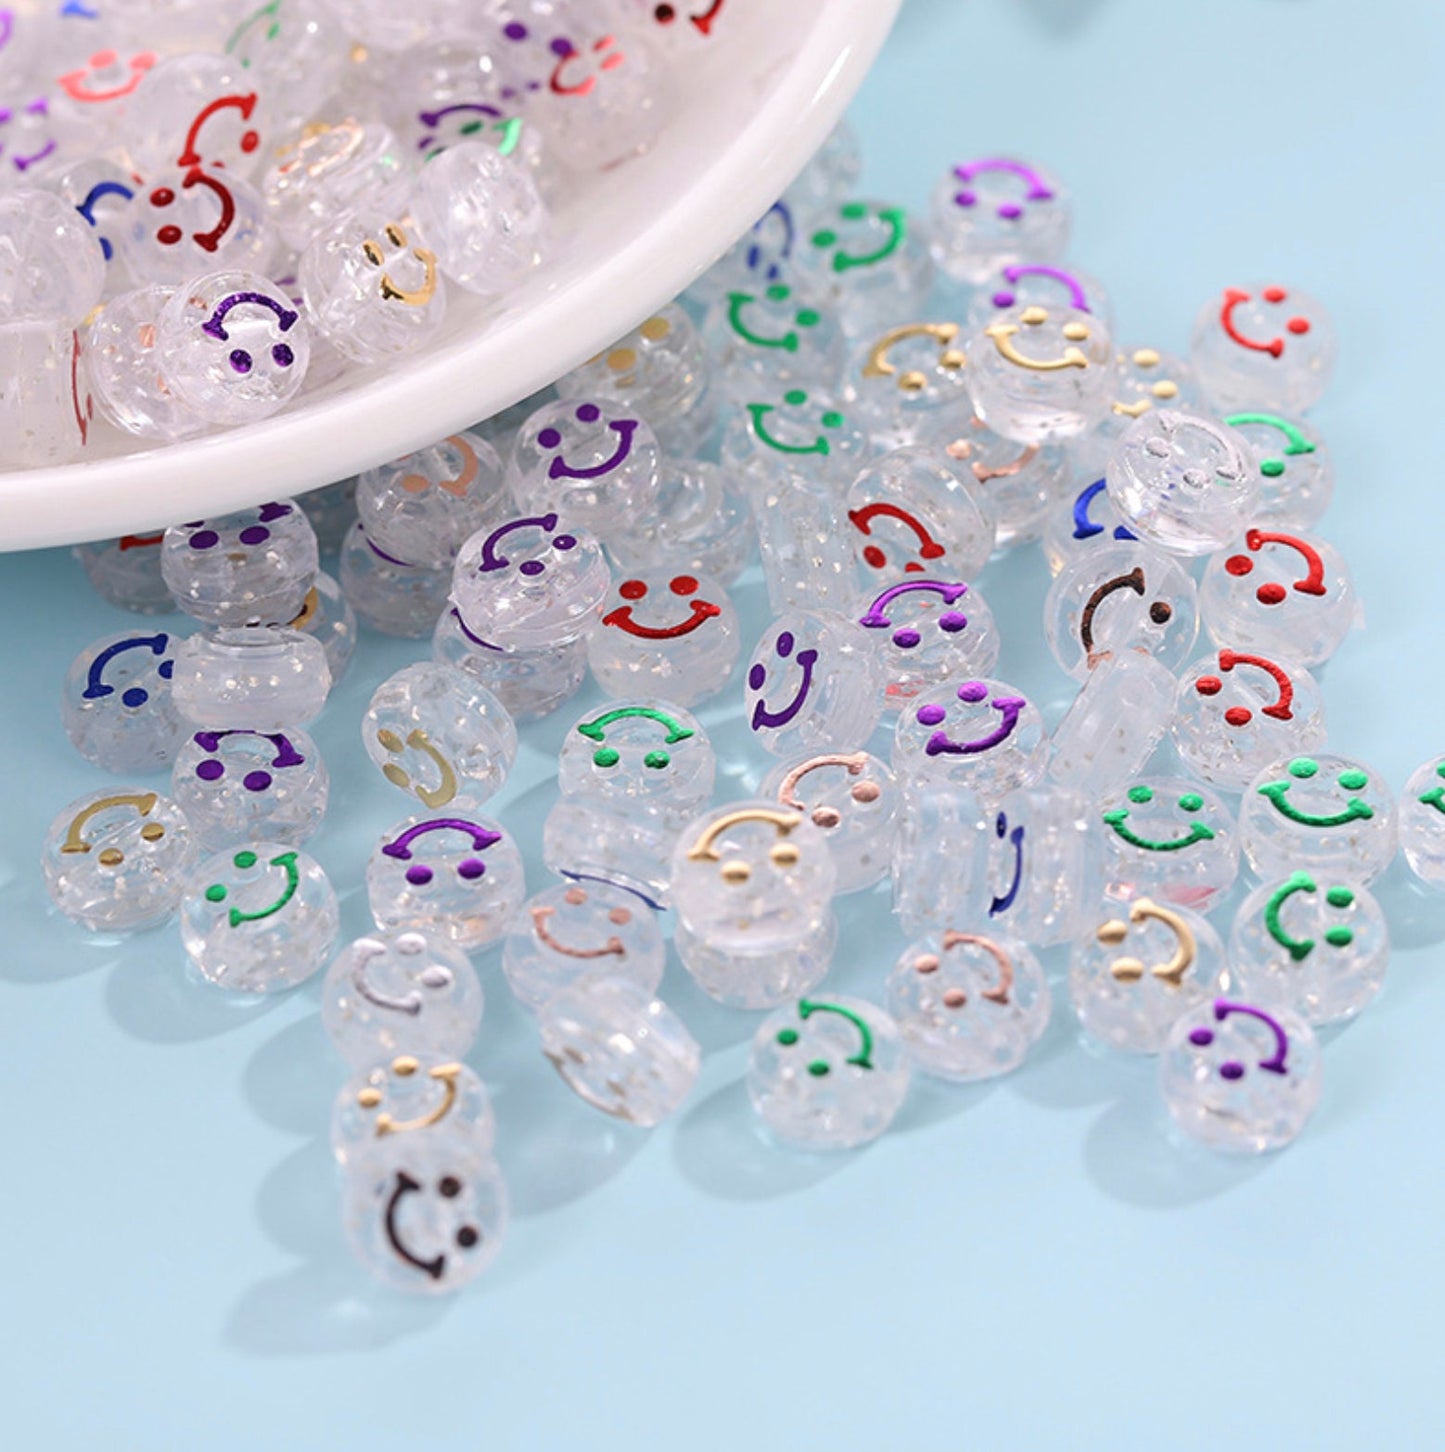 Solid/Transparent Colorful Mixed Color Smiley Face Beads (6mm x 10mm)